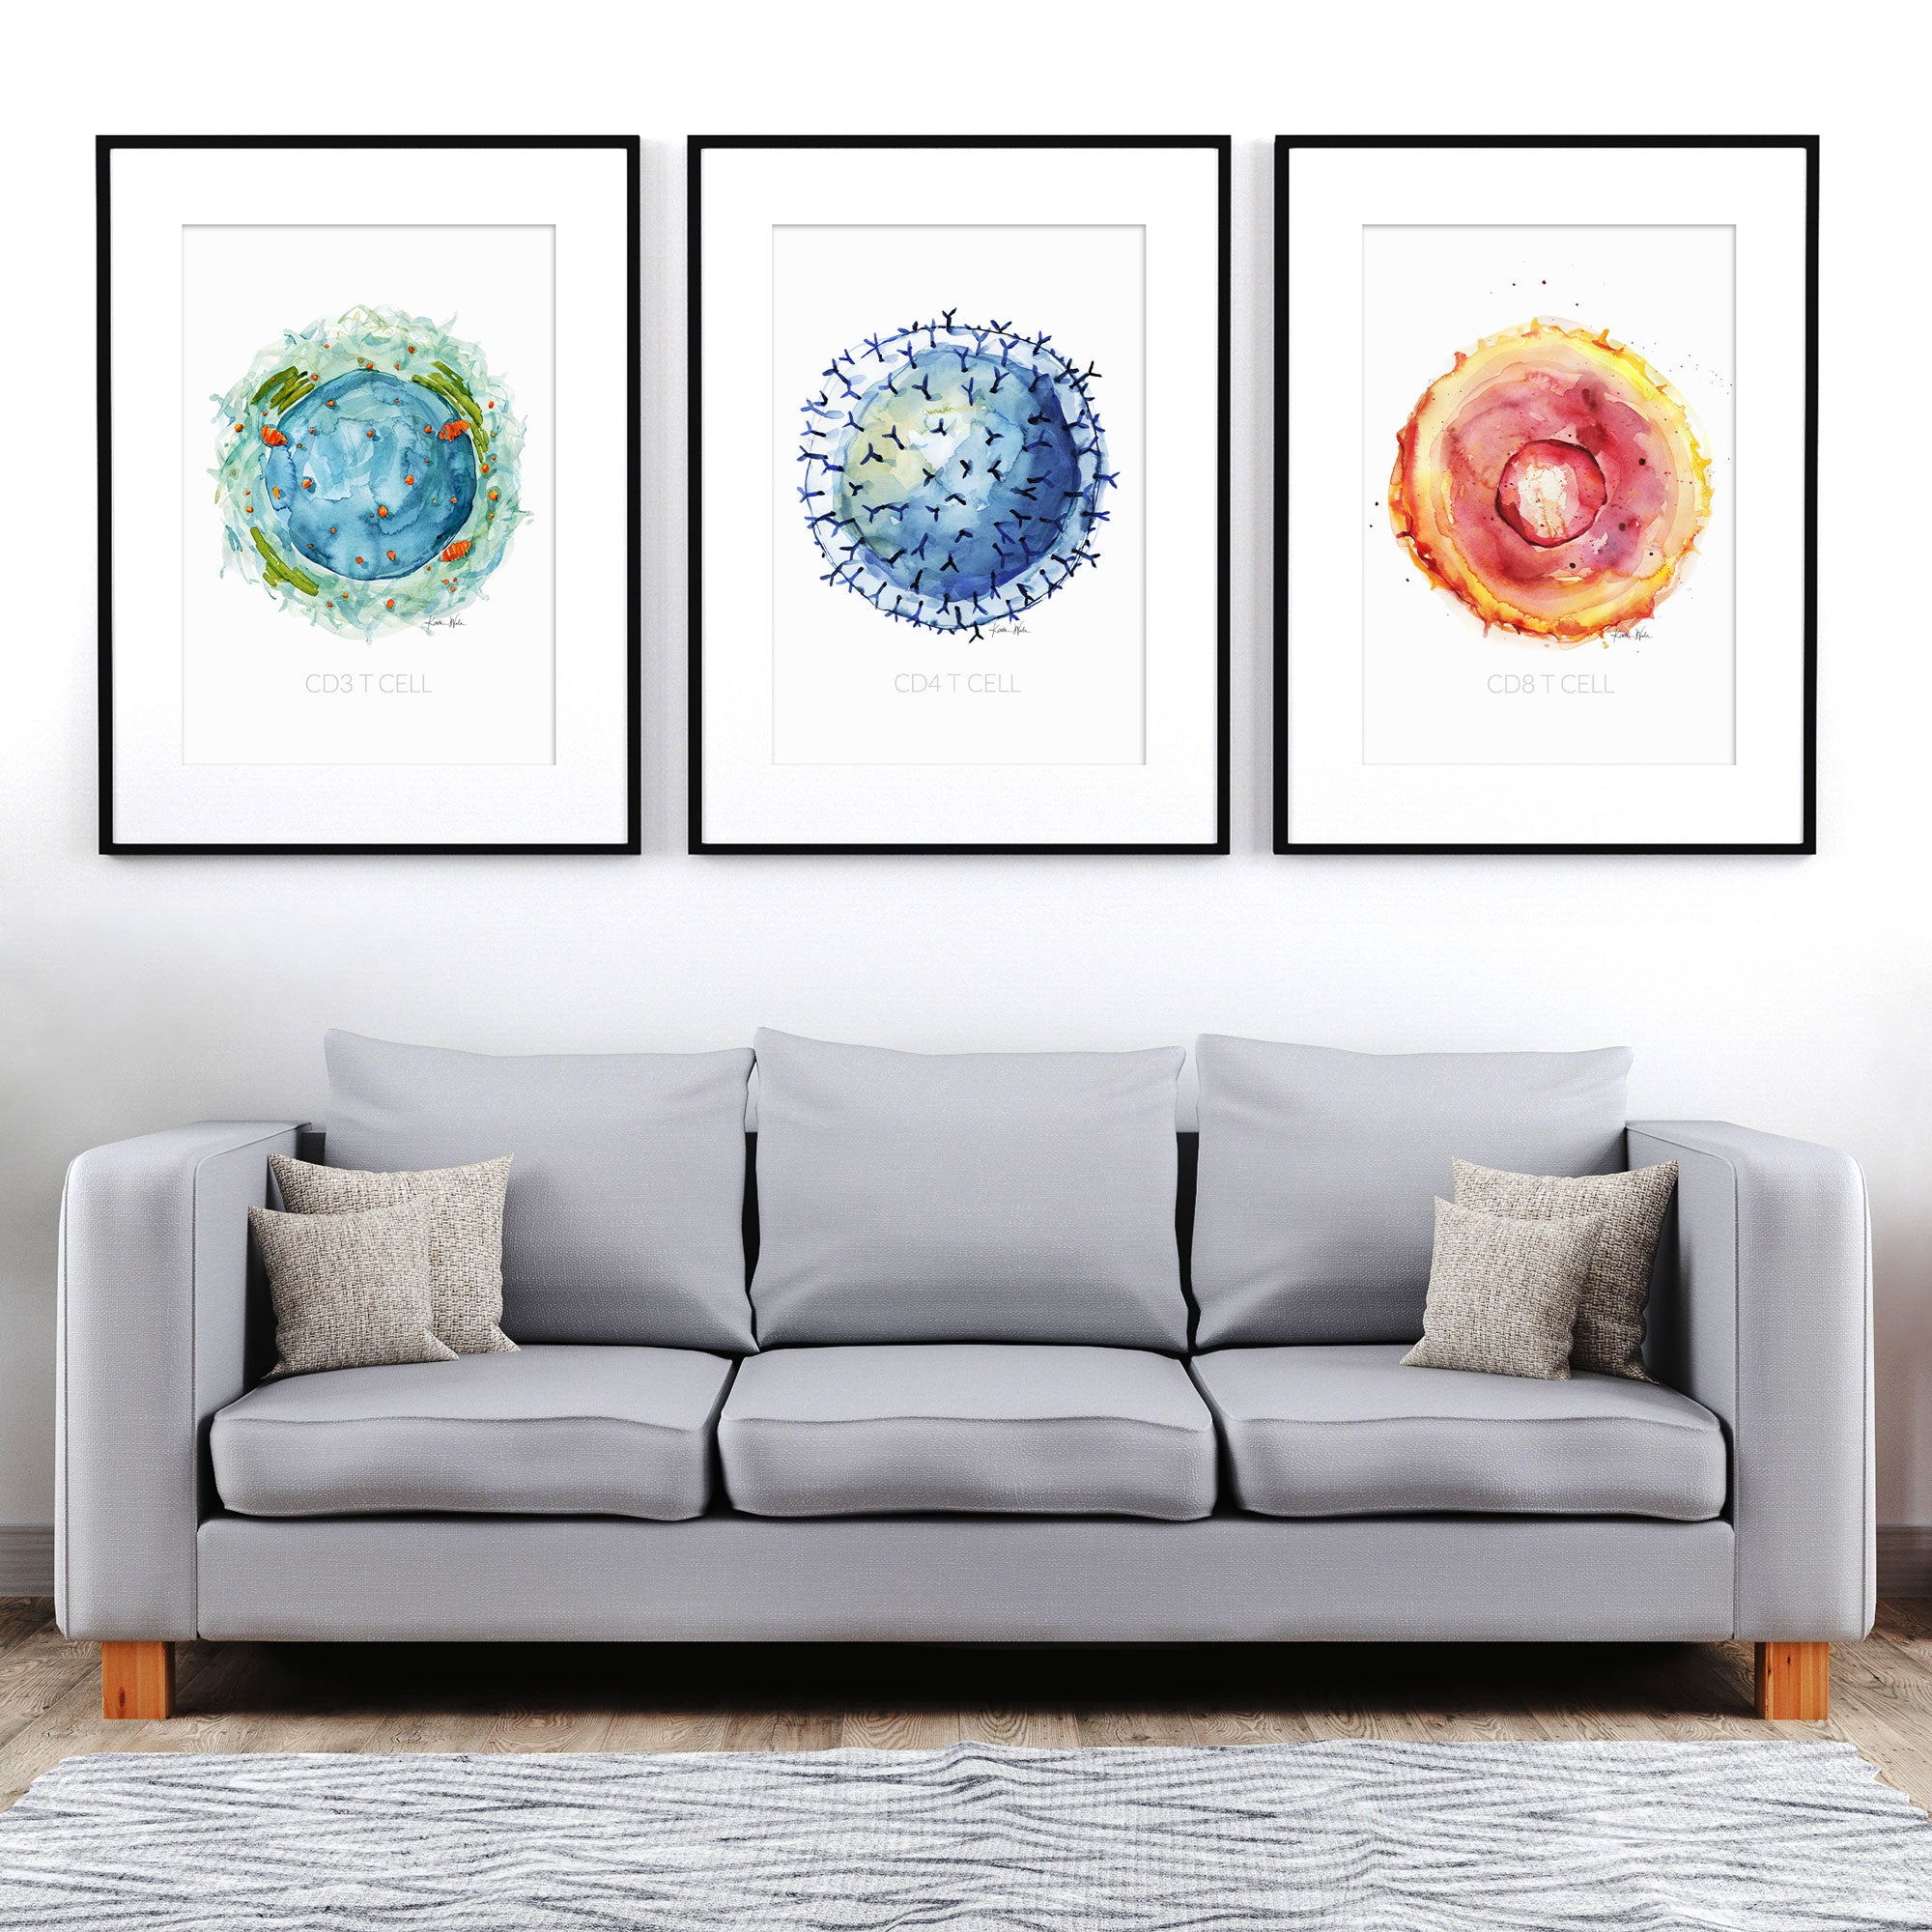 Framed watercolor painting set of t-cells. The painting is hanging over a gray couch.